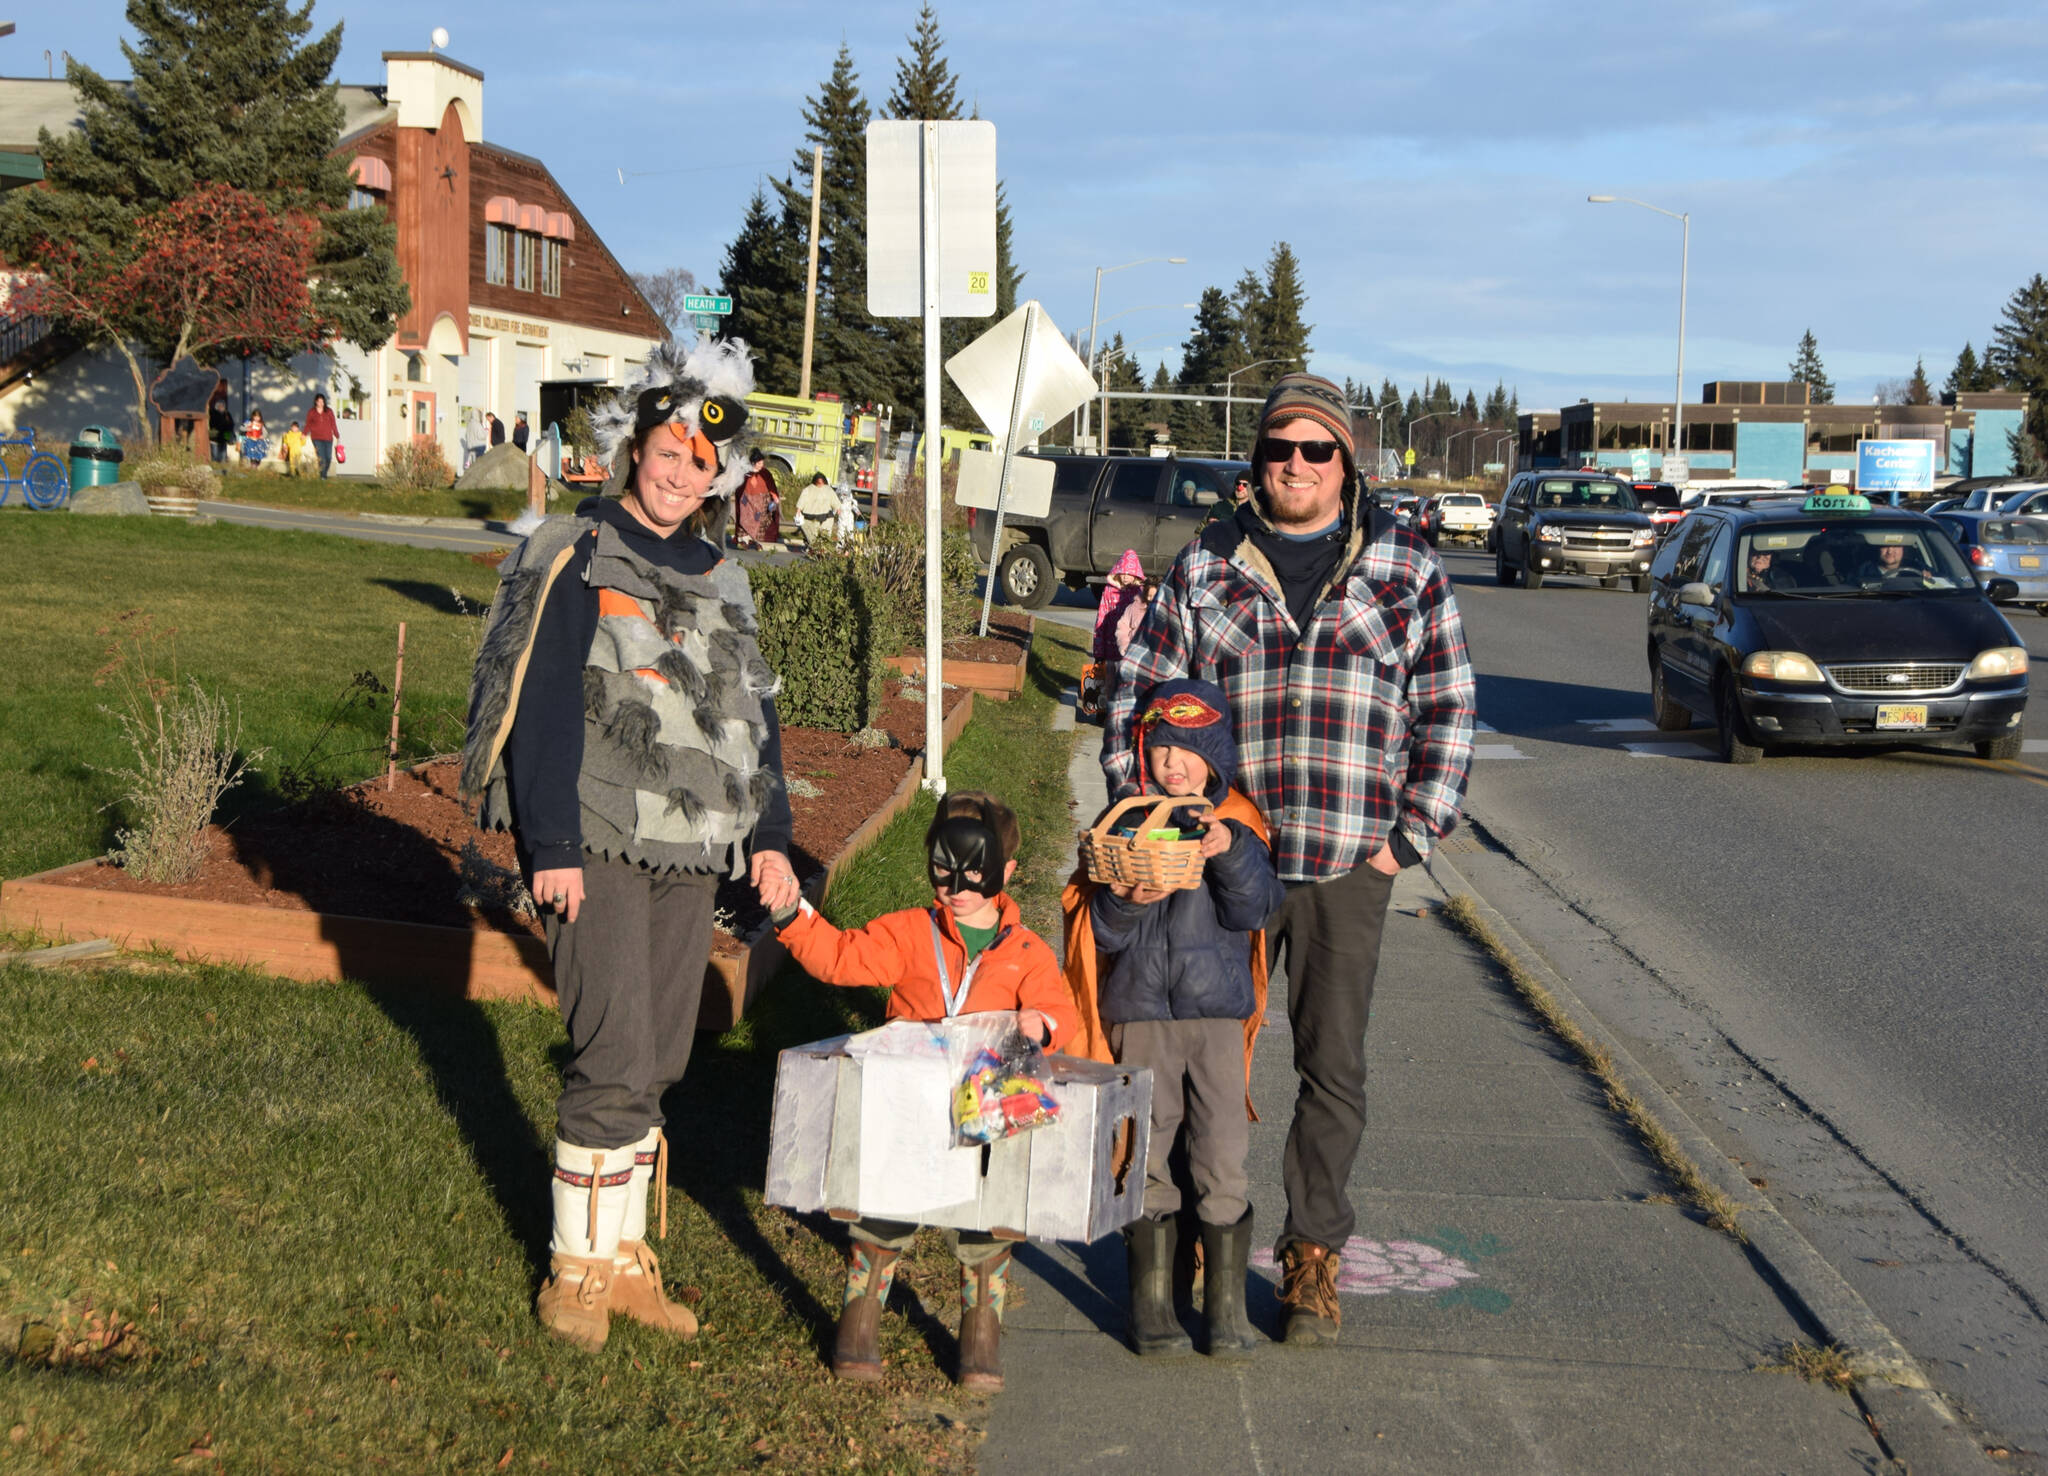 Kids show of their candy during the Homer Chamber of Commerce’s first annual Pioneer Avenue Trick-or-Treat event on Monday, Oct. 31 in Homer, Alaska. (Photo by Charlie Menke / Homer News)